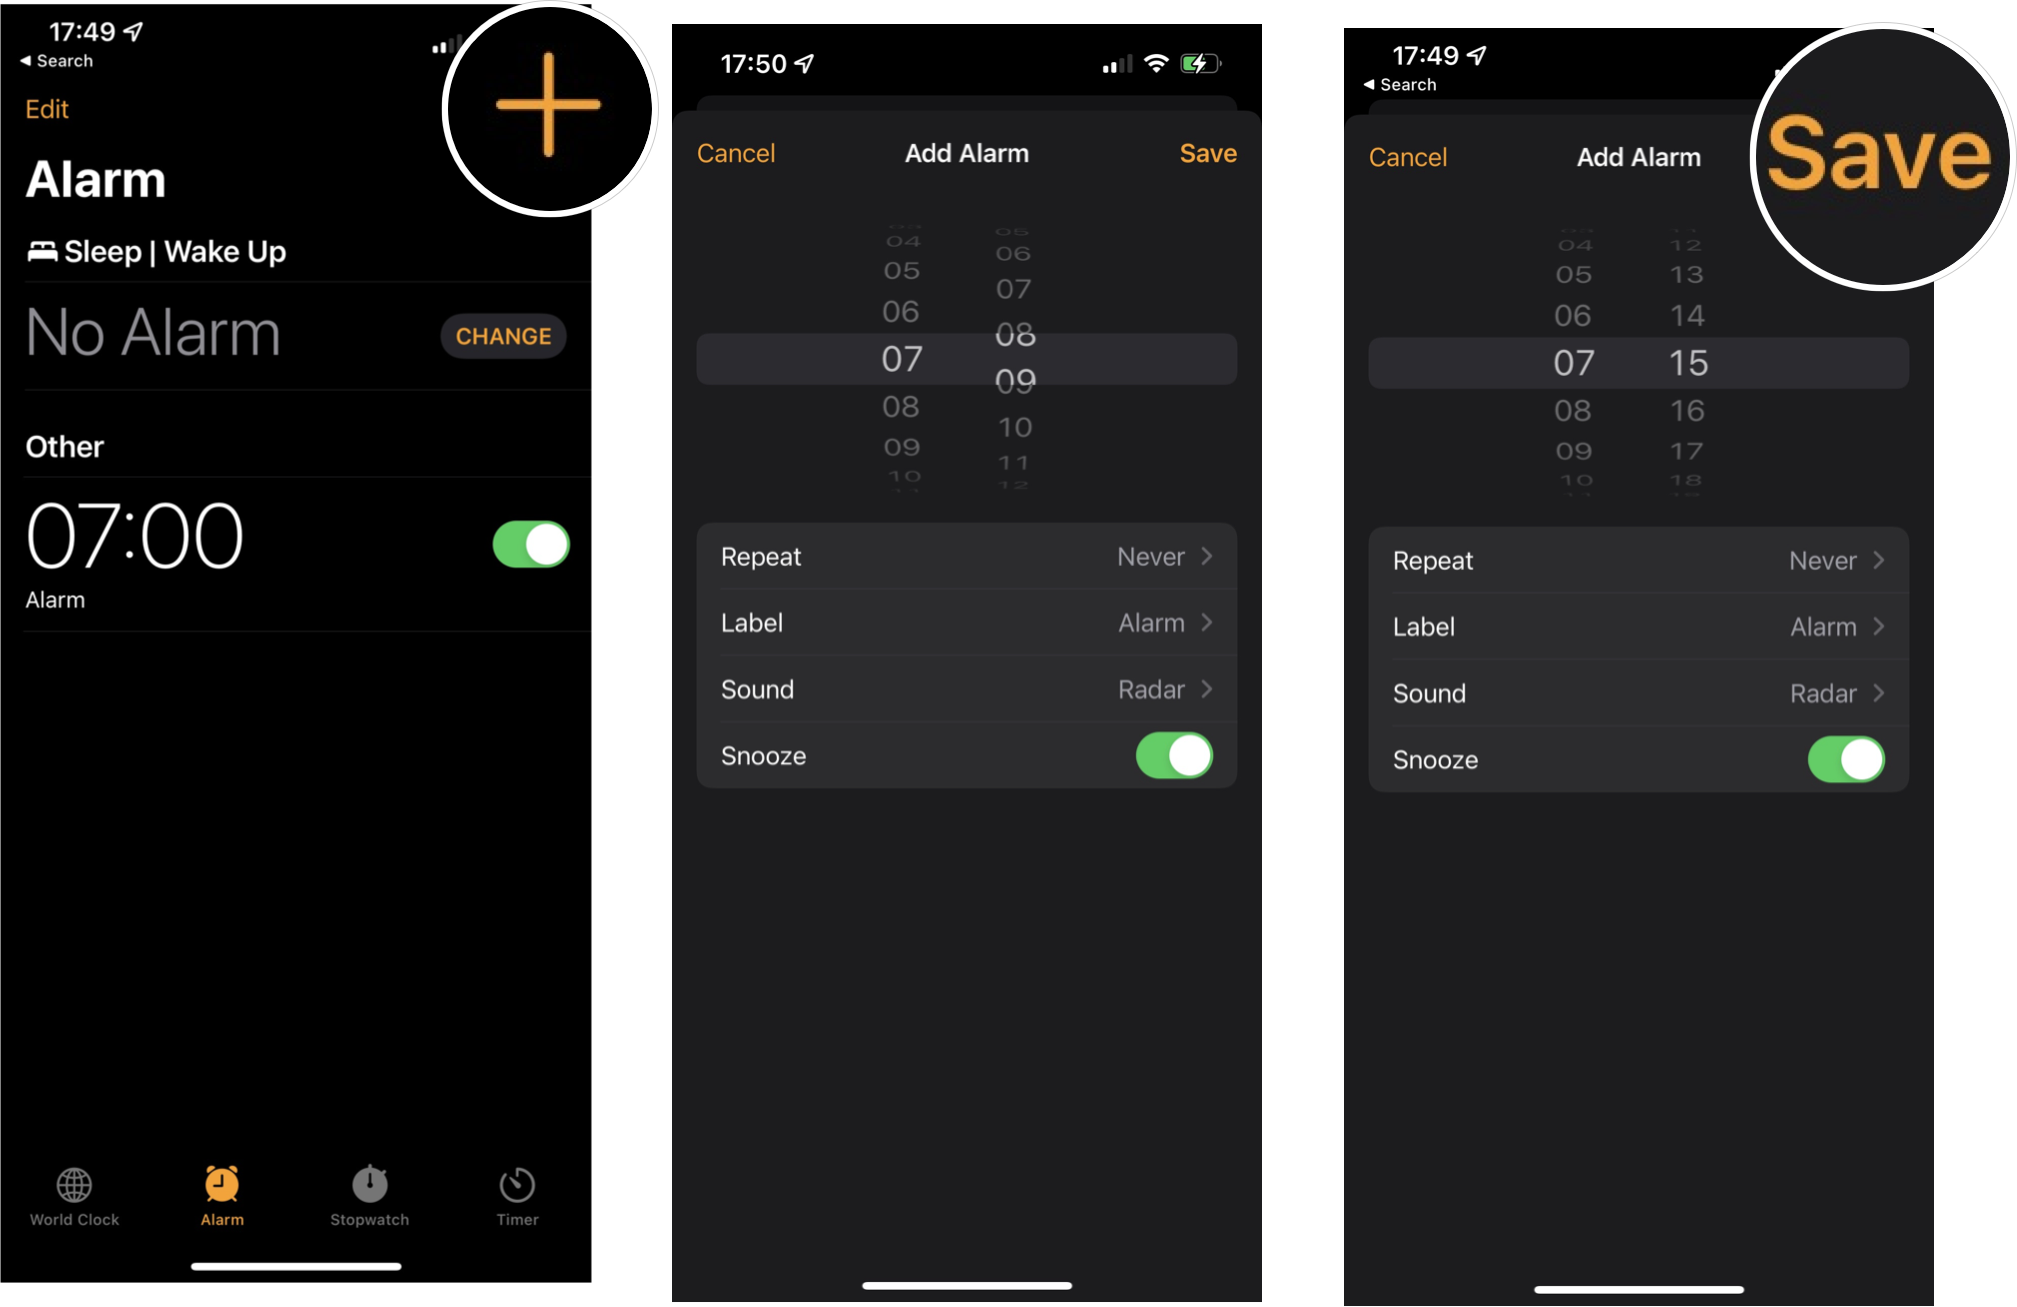 How to set alarms on iPhone or iPad by showing steps: Launch the Clock app, tap on the Alarm tab, tap on the Add button on the top right corner of your screen. Swipe up and down on the picker to select the time and then tap on Save